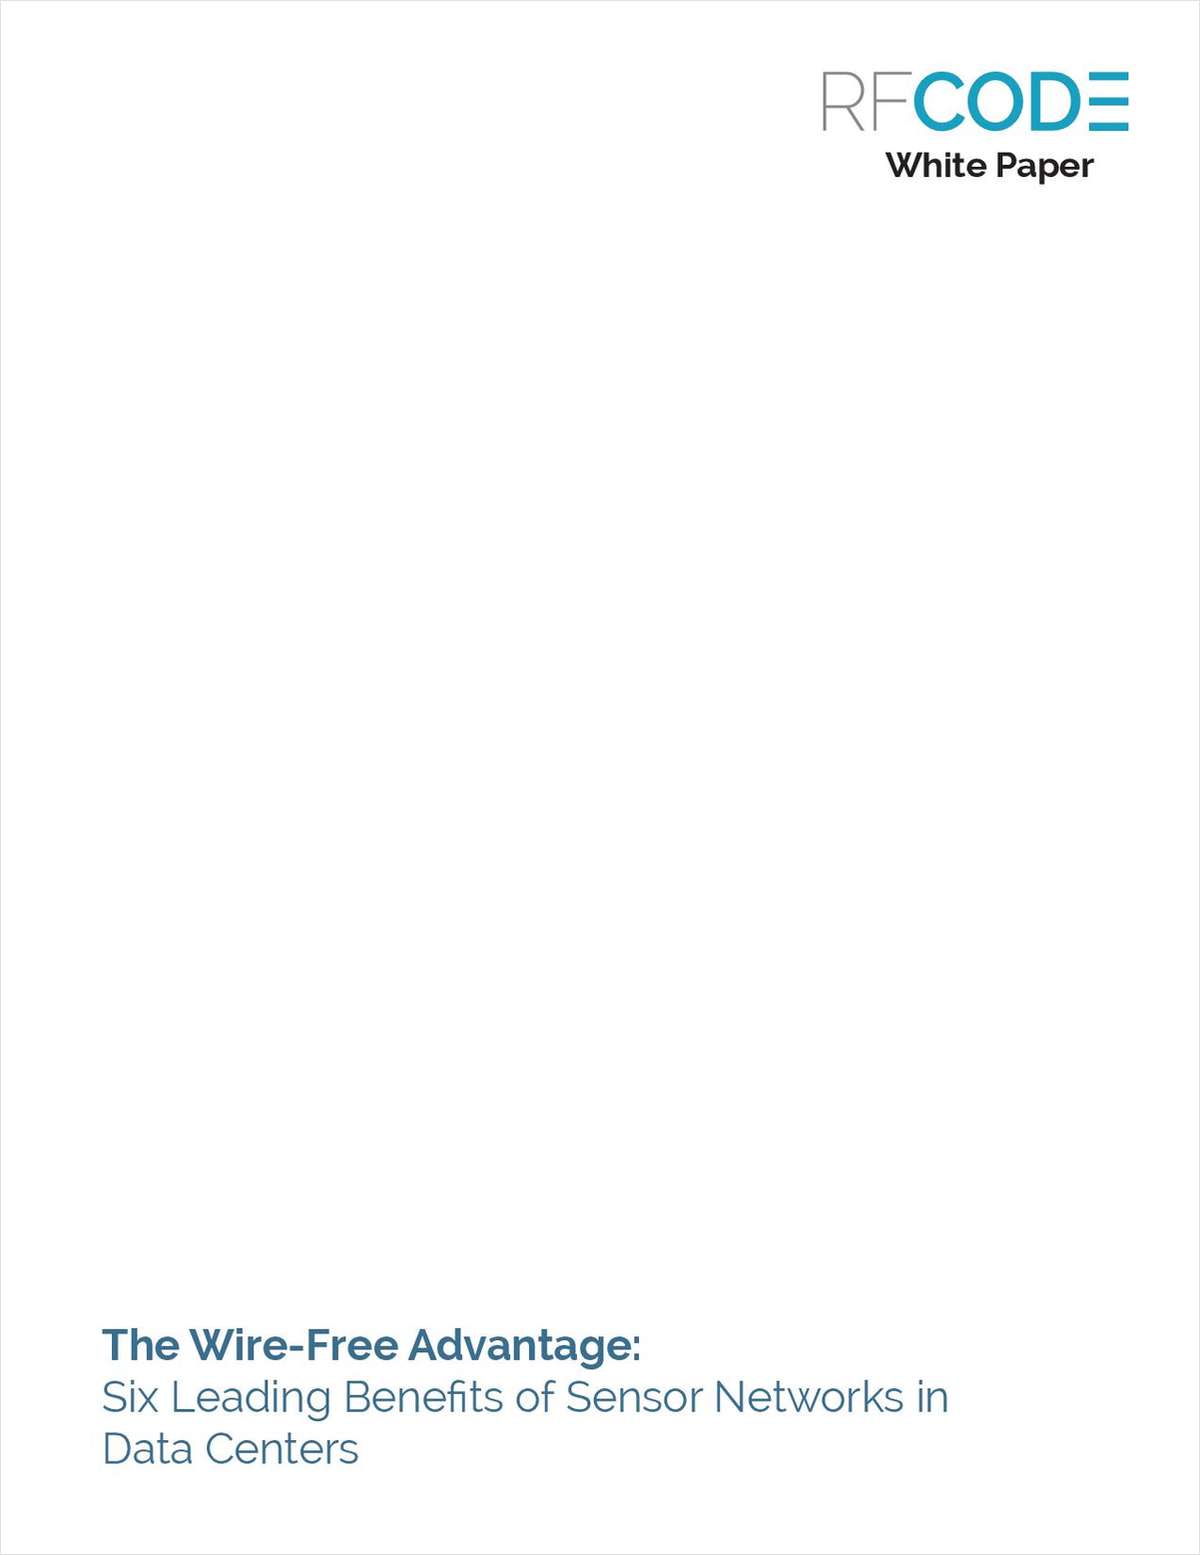 The Wire-Free Advantage: Six Leading Benefits of Sensor Networks in Data Centers